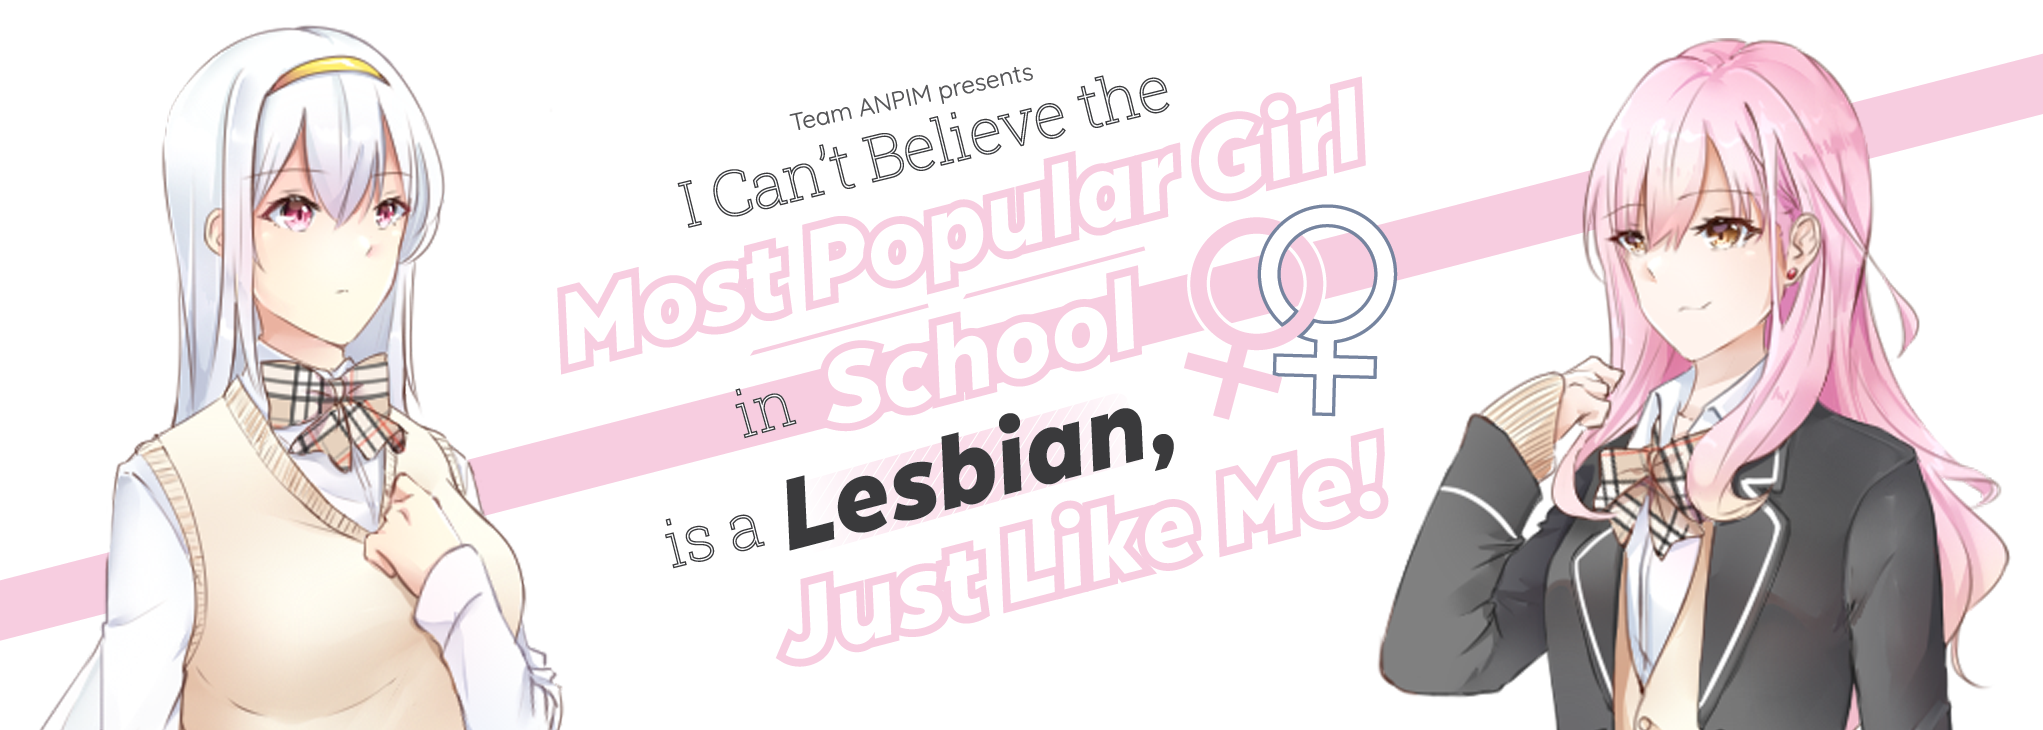 I Can't Believe the Most Popular Girl in School is a Lesbian, Just Like Me!